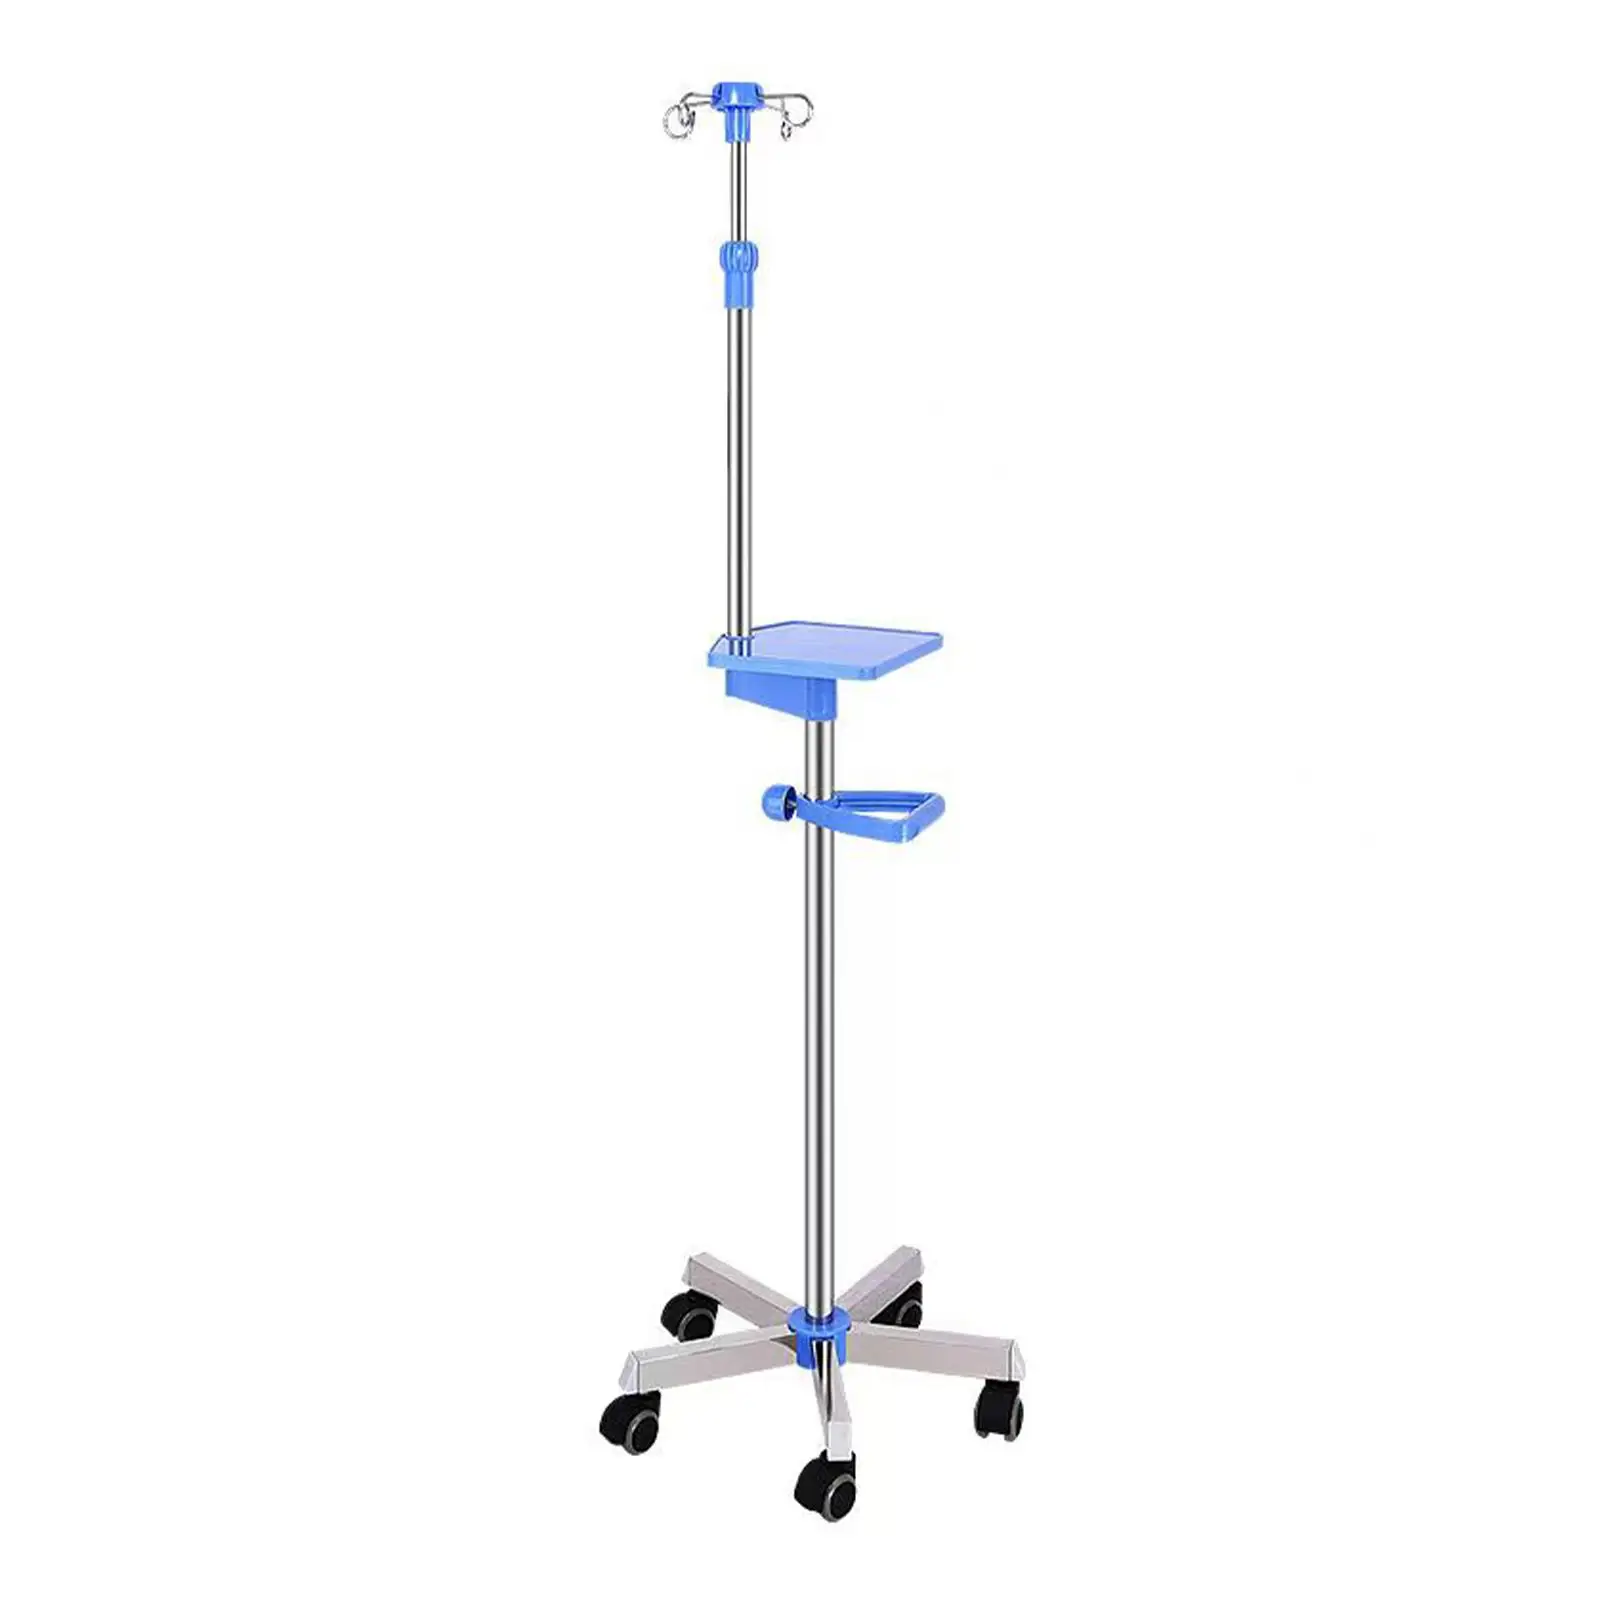 IV Pole Stand Adjustable IV Bag Holder Stainless Steel with Wheels IV Bag Stand IV Stand for Service Centers Nursing Homes Beds